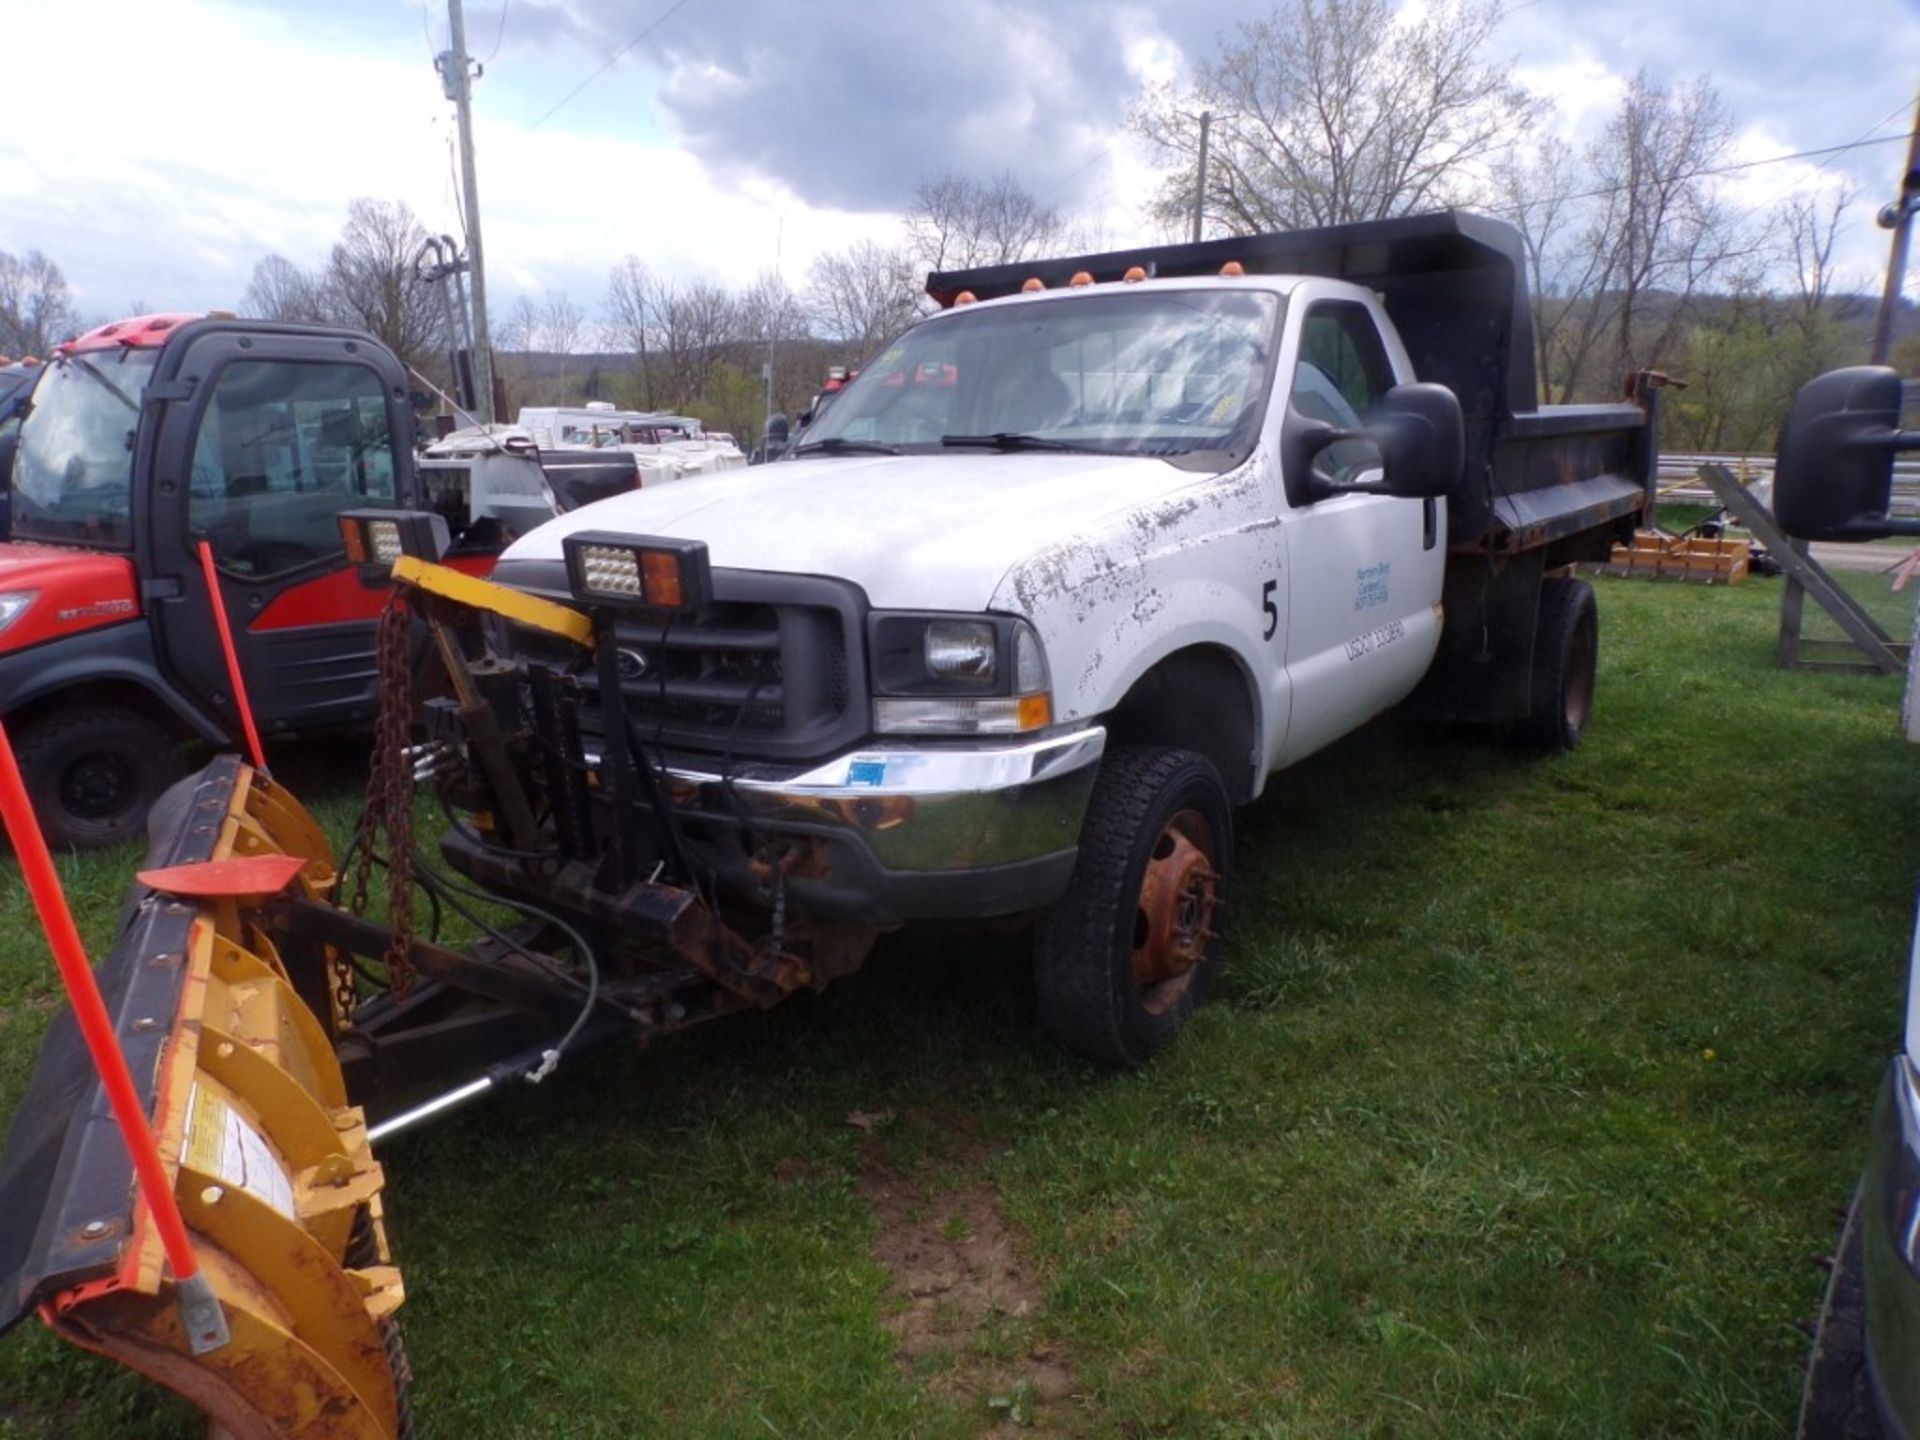 2004 Ford F550 Reg. Cab Dump Truck, 4 WD, Auto, Gas, EZ-V Plow by Fisher, Vin. # 1FDAF57S14ED46294 - - Image 3 of 6